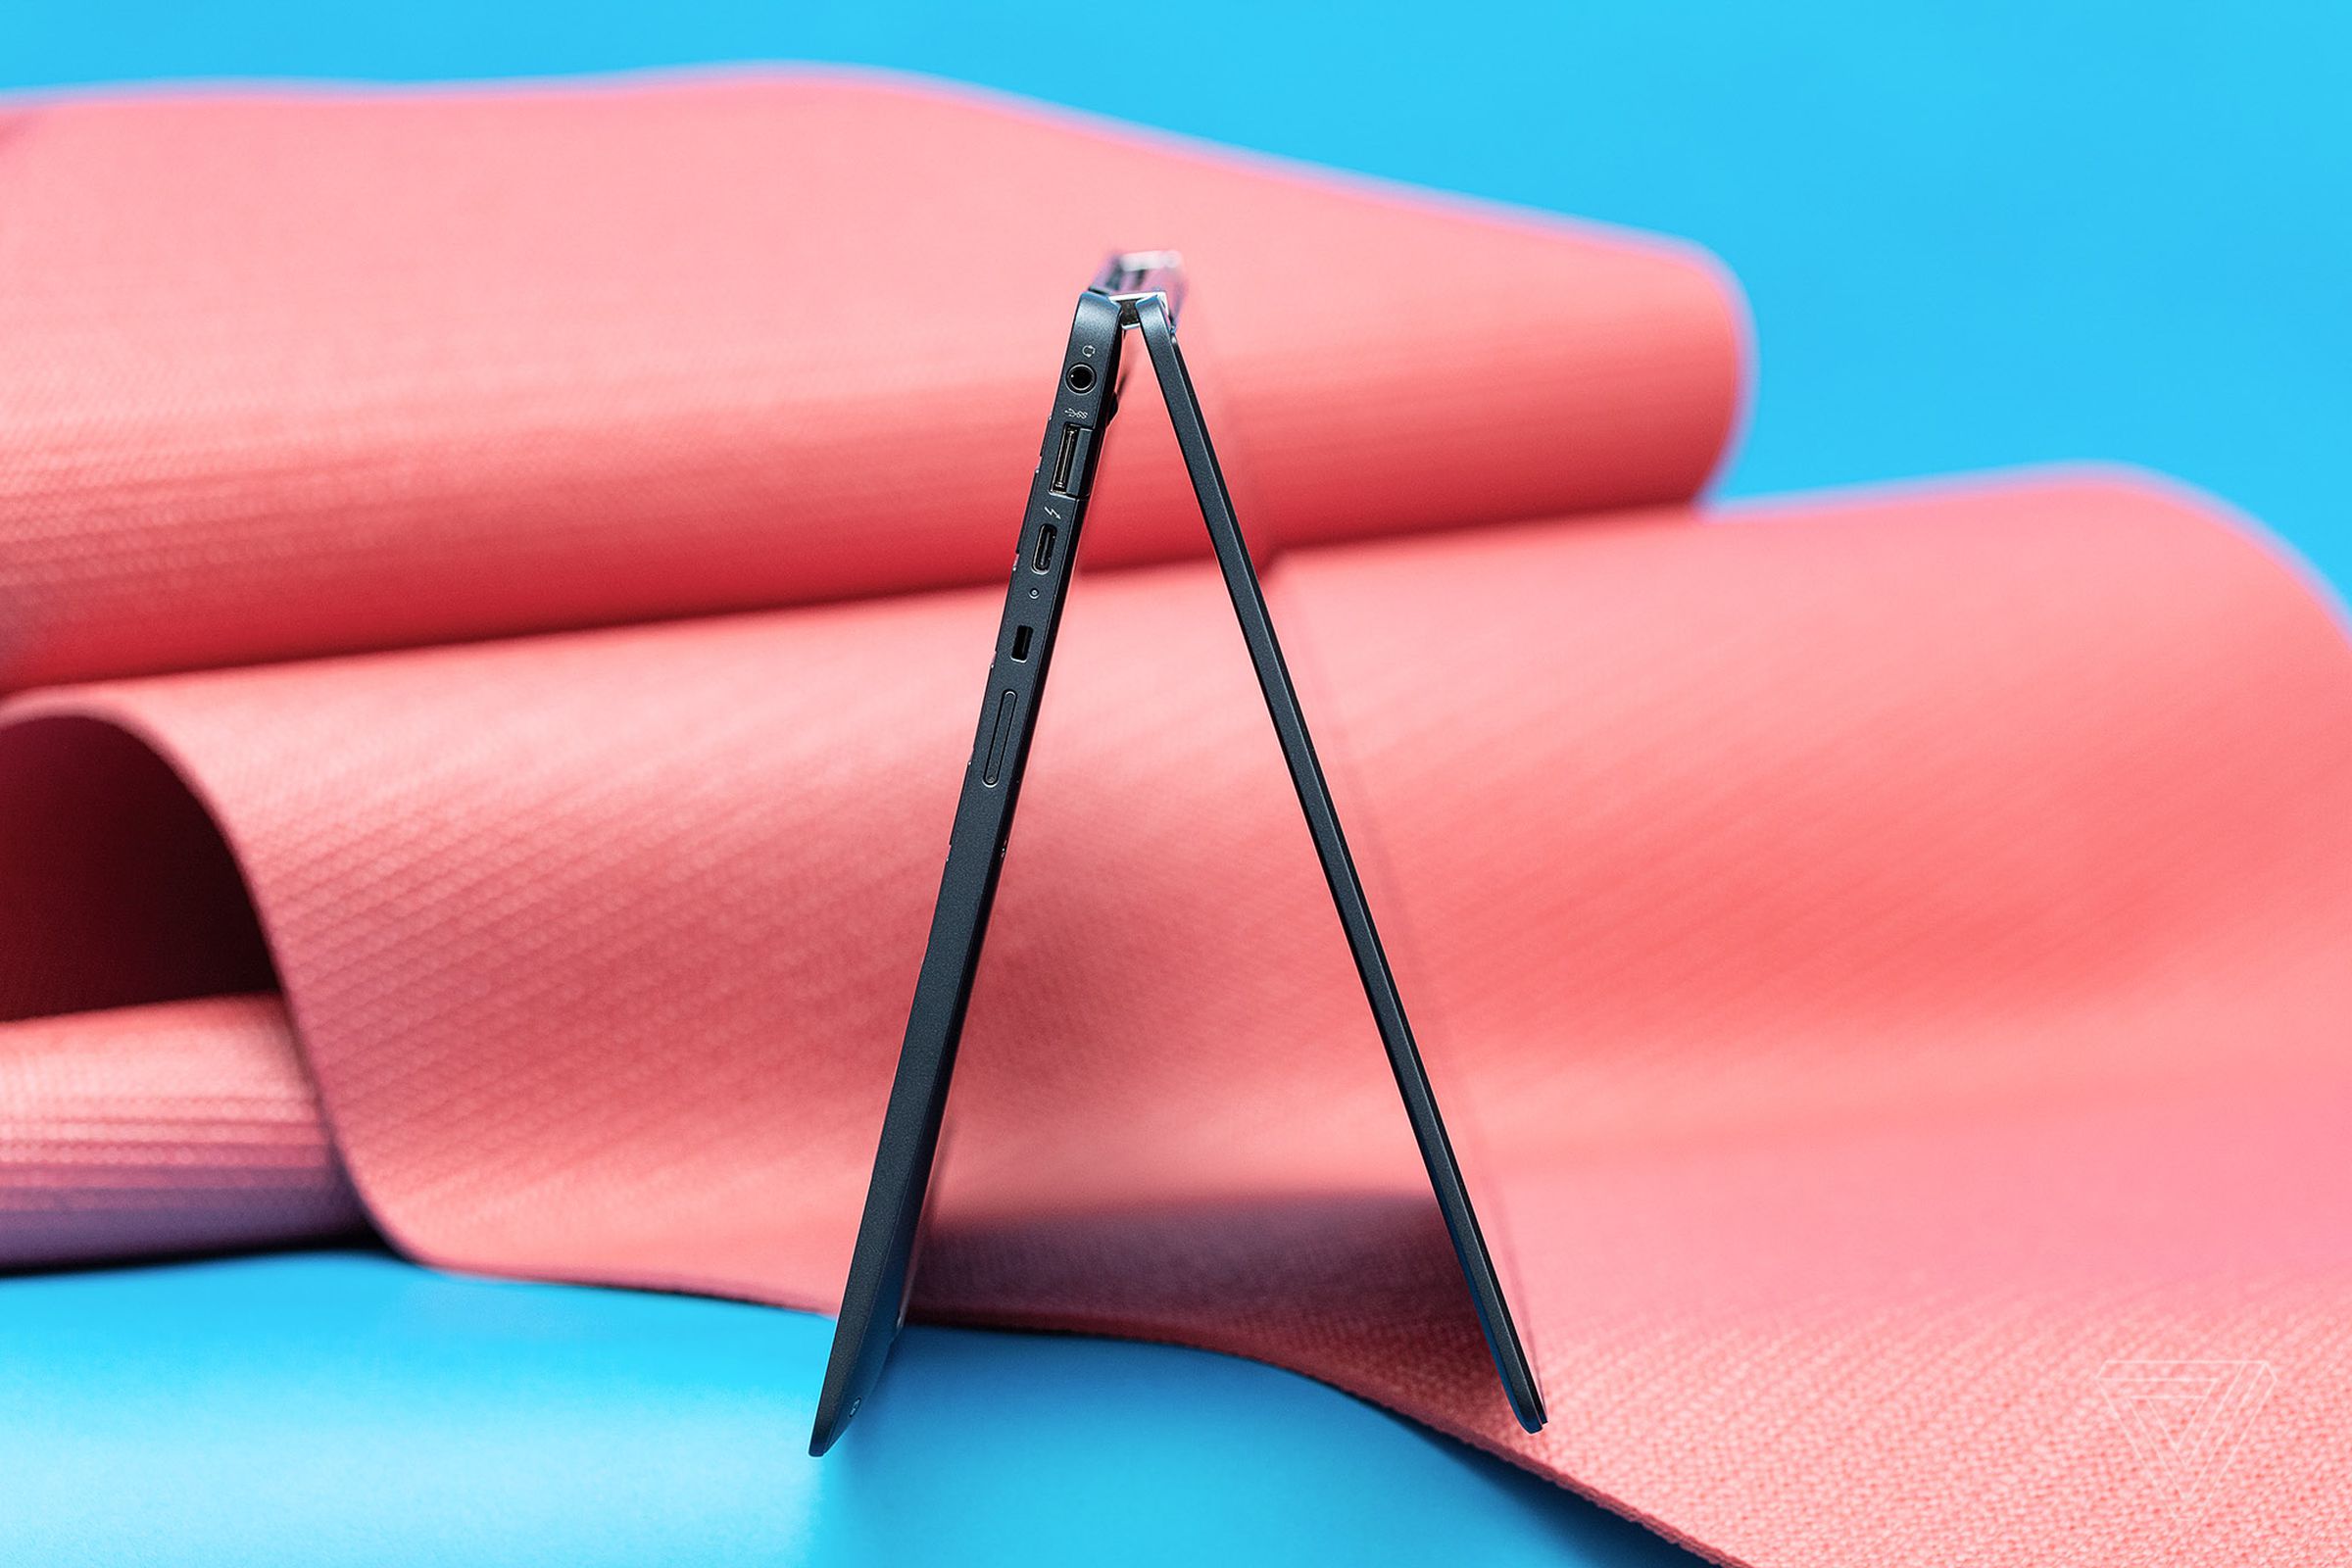 The HP Elite Dragonfly Chromebook folded backwards in tent mode, seen from the side on a blue and pink background.